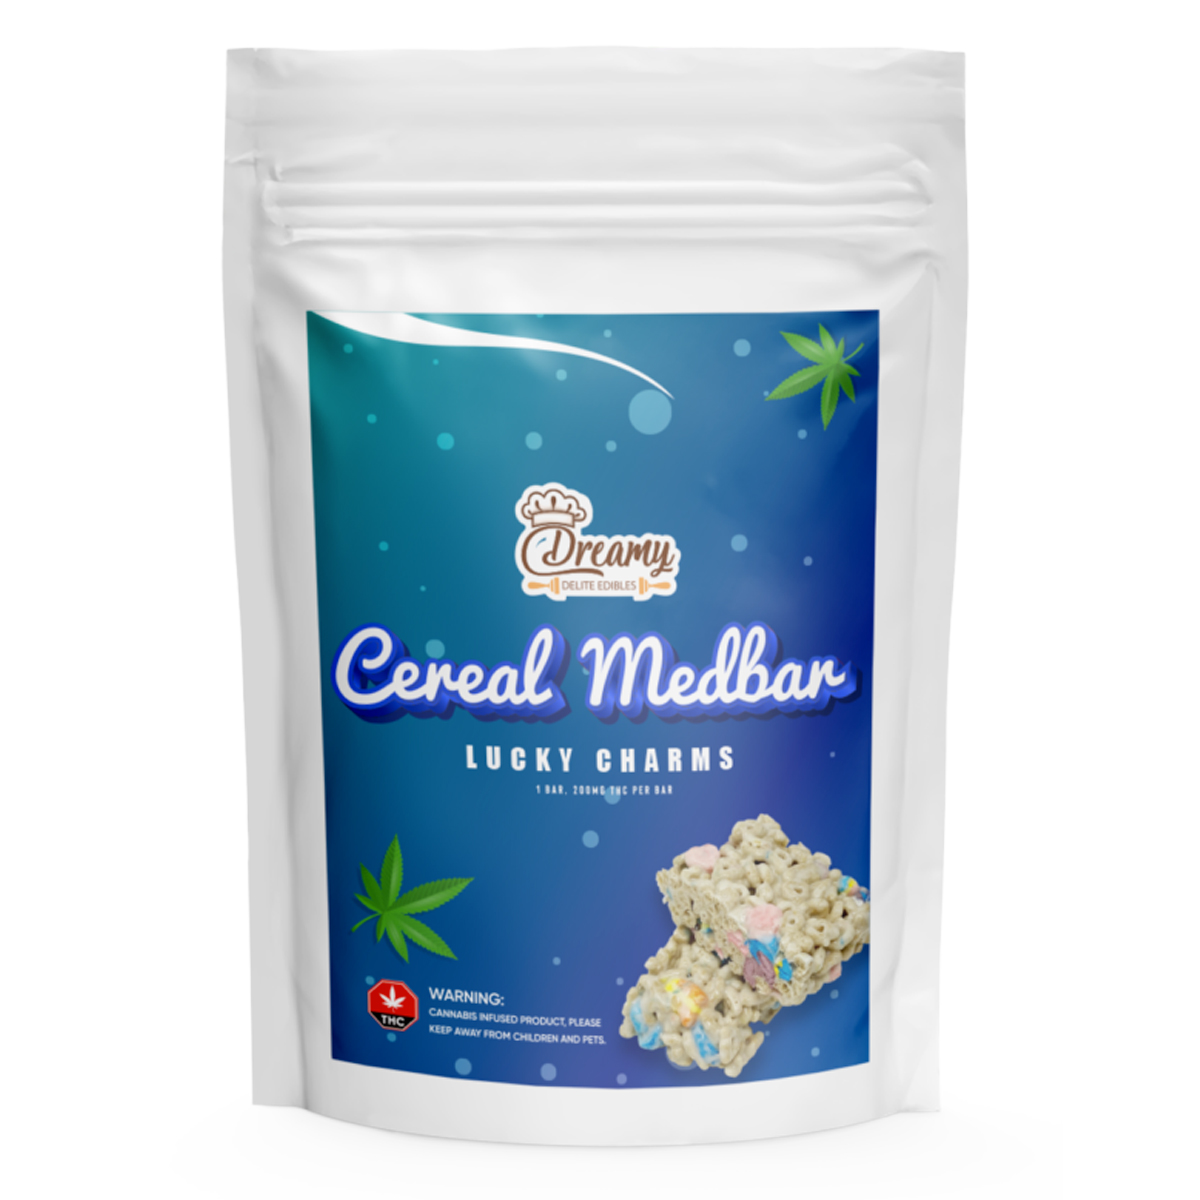 Dreamy Delite Lucky Charms Cereal Medbar 200mg